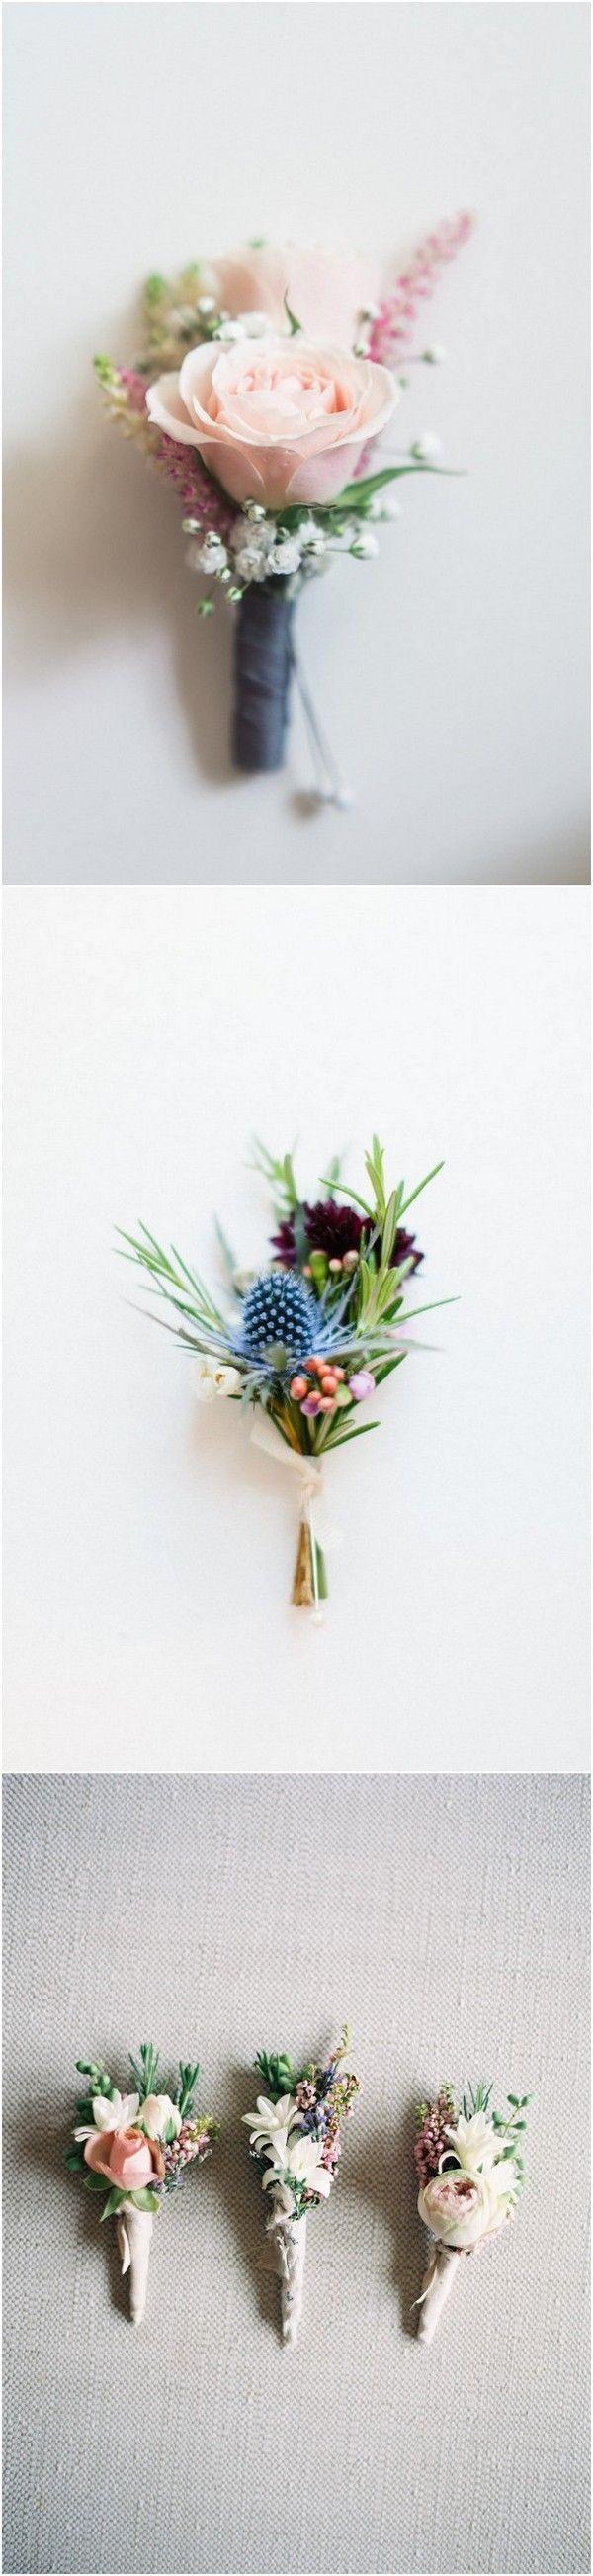 Mariage - 20 Fabulous Wedding Boutonnieres For Groom And Groomsmen